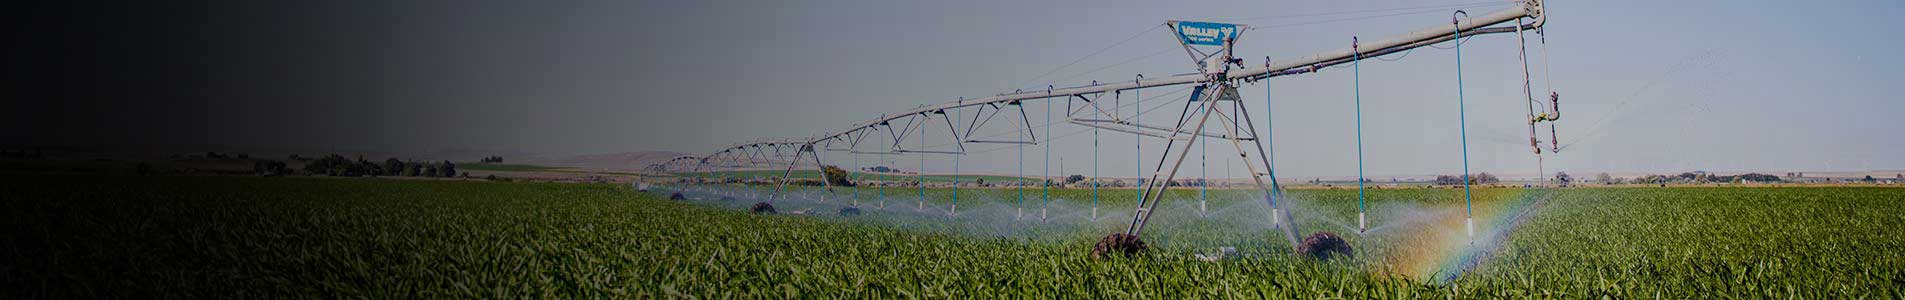 valley  drought solutions - irrigation solutions